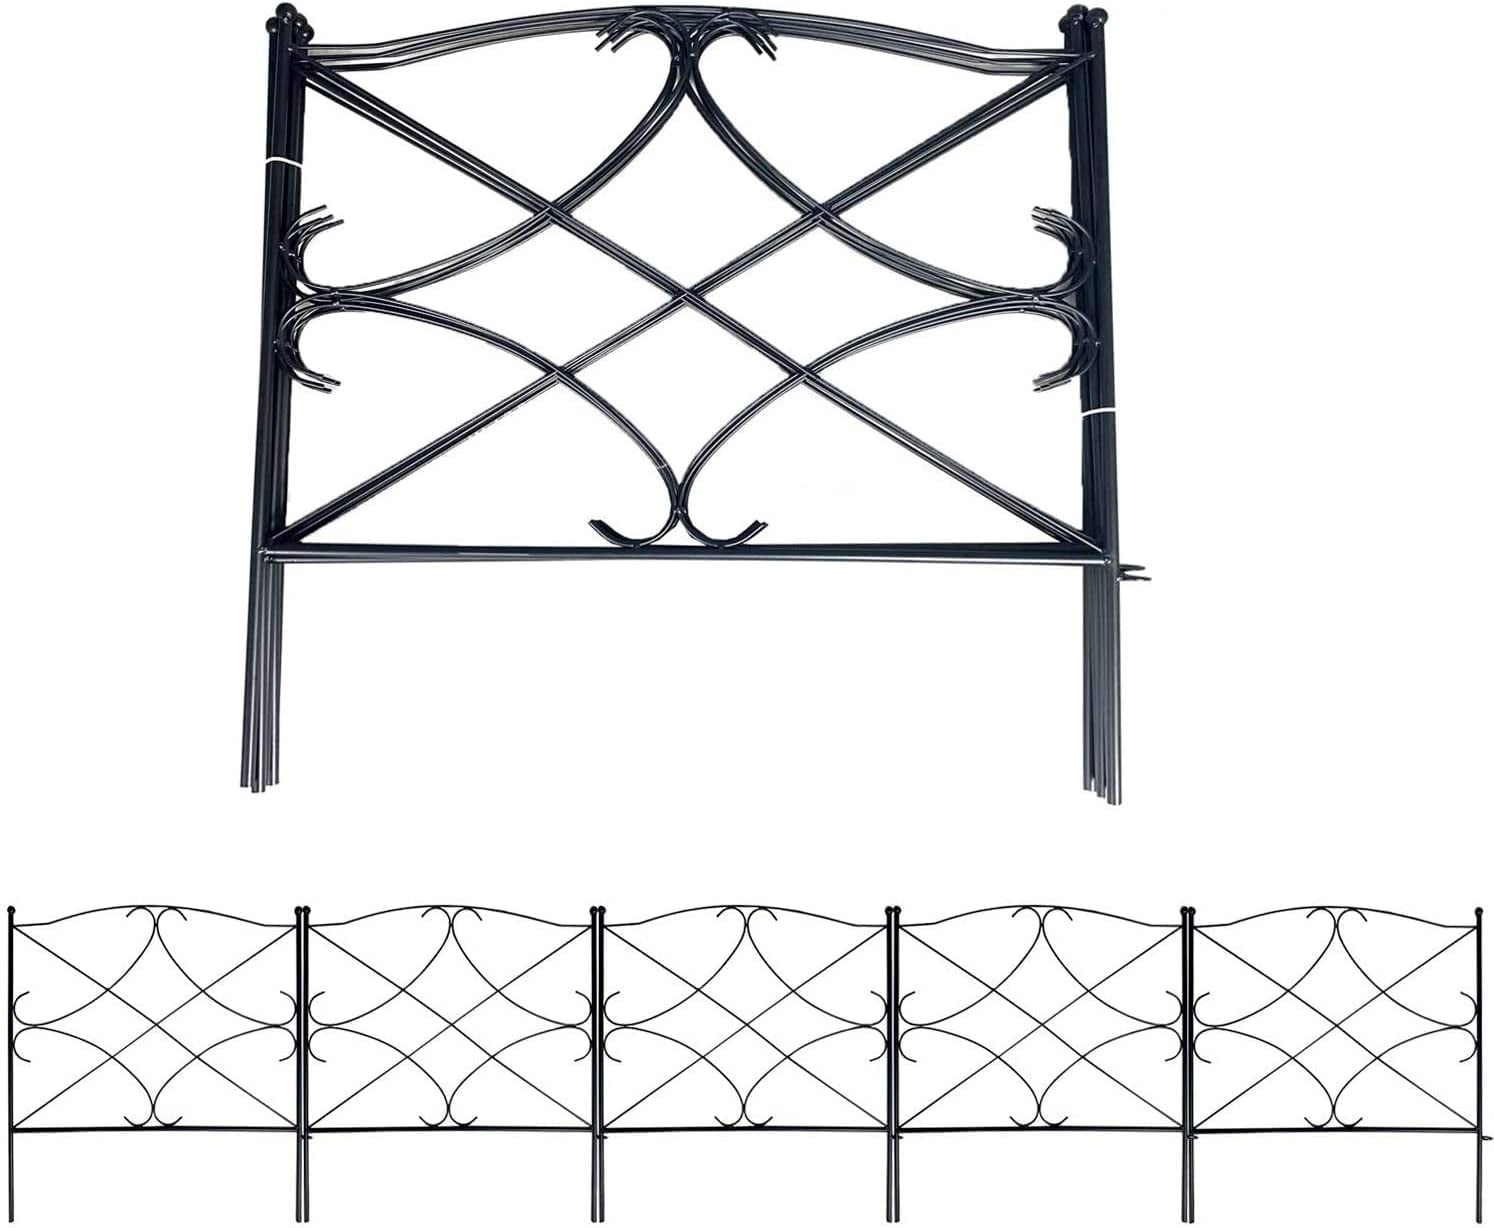 Set of 5 x Decorative Garden Fence 18in x 16in Coated Metal Outdoor Rustproof Landscape Wrought Iron Wire Border Fencing Folding Patio Fences Flower Bed Barrier Section Panel Decor Picket Edging Black